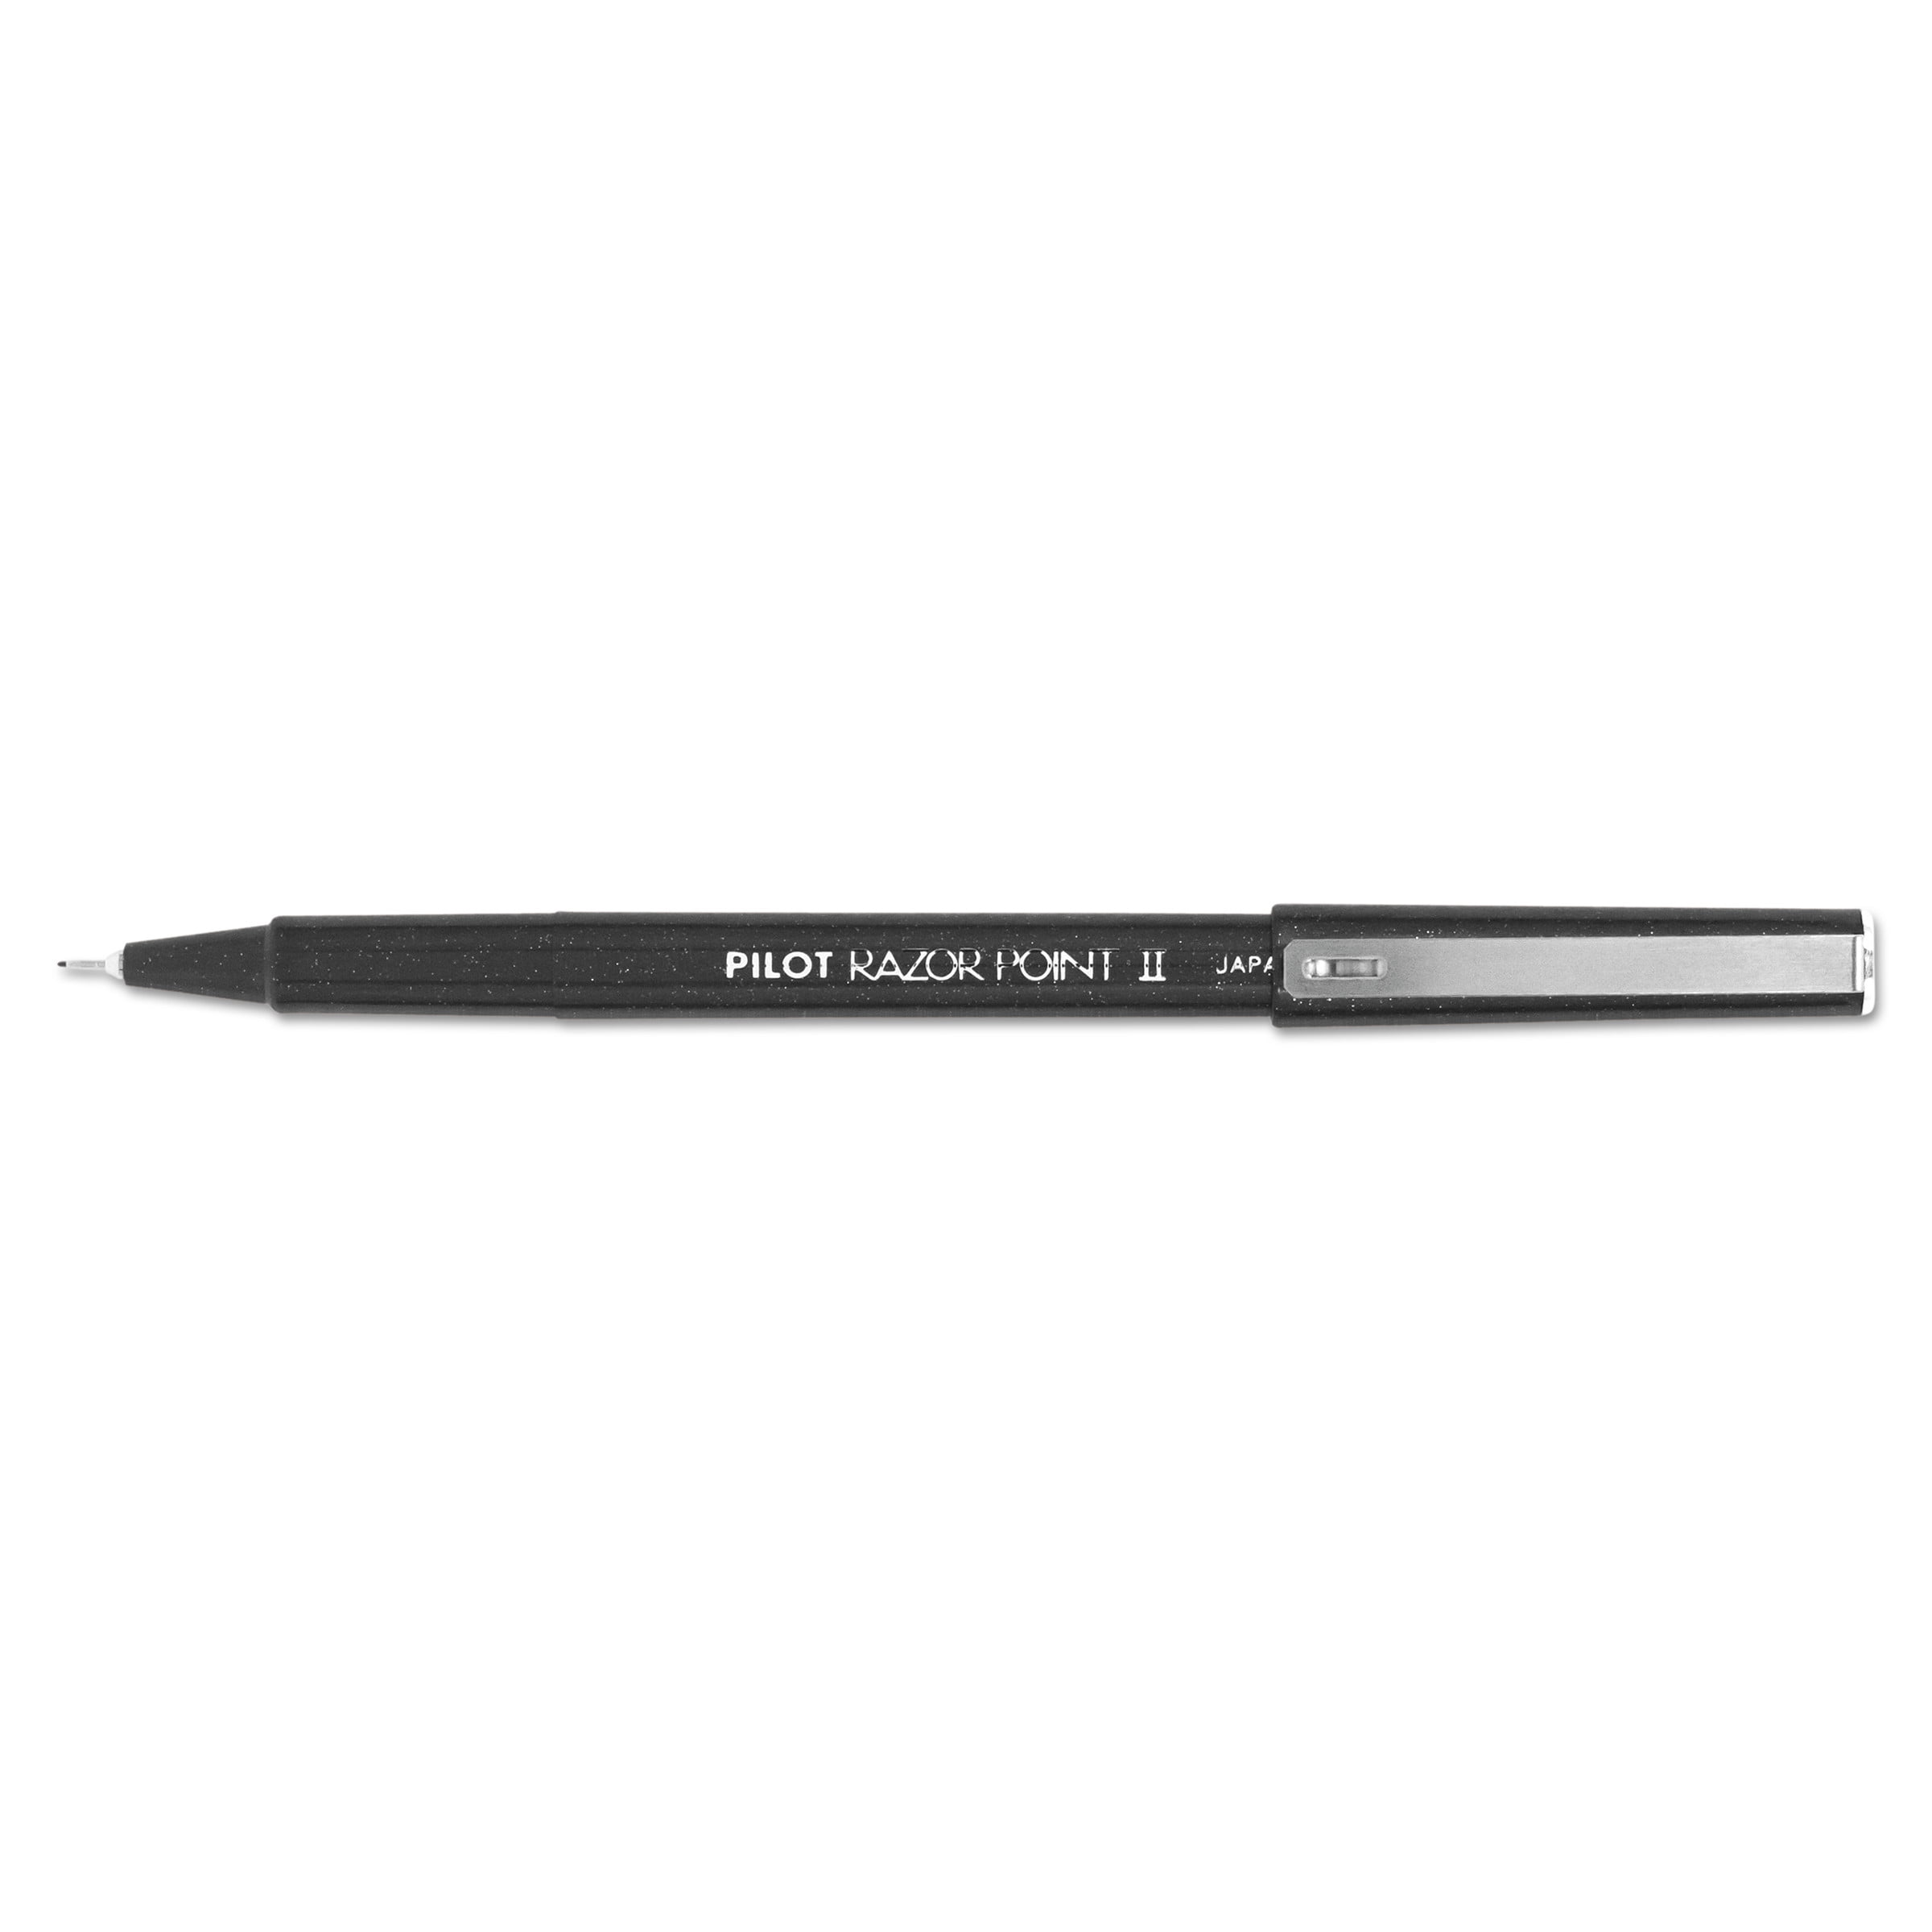 Inc Optimus Fine Point Pen, Smooth Bold Writing, Black Ink, 2 pack